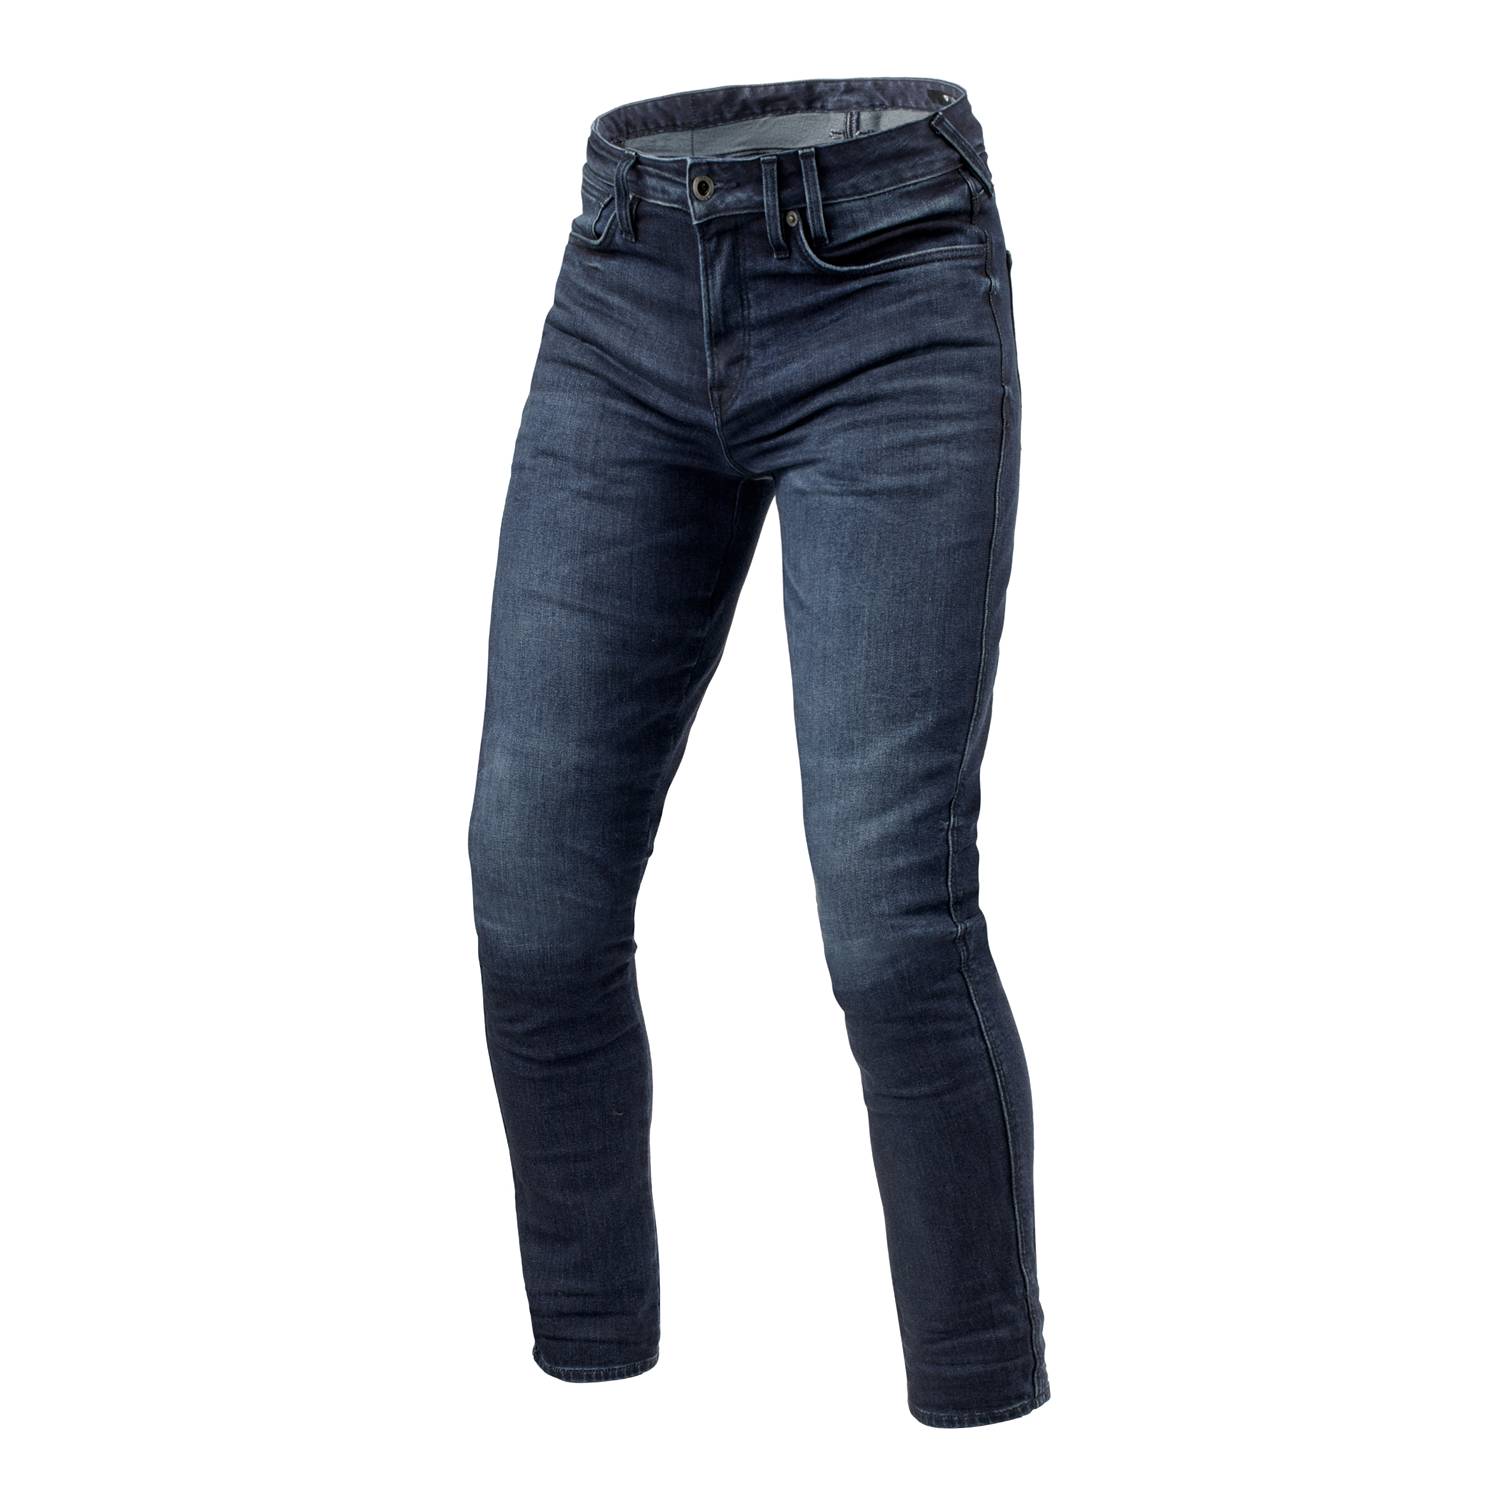 Image of REV'IT! Jeans Carlin SK Dark Blue Used L34 Motorcycle Jeans Size L34/W32 ID 8700001376402